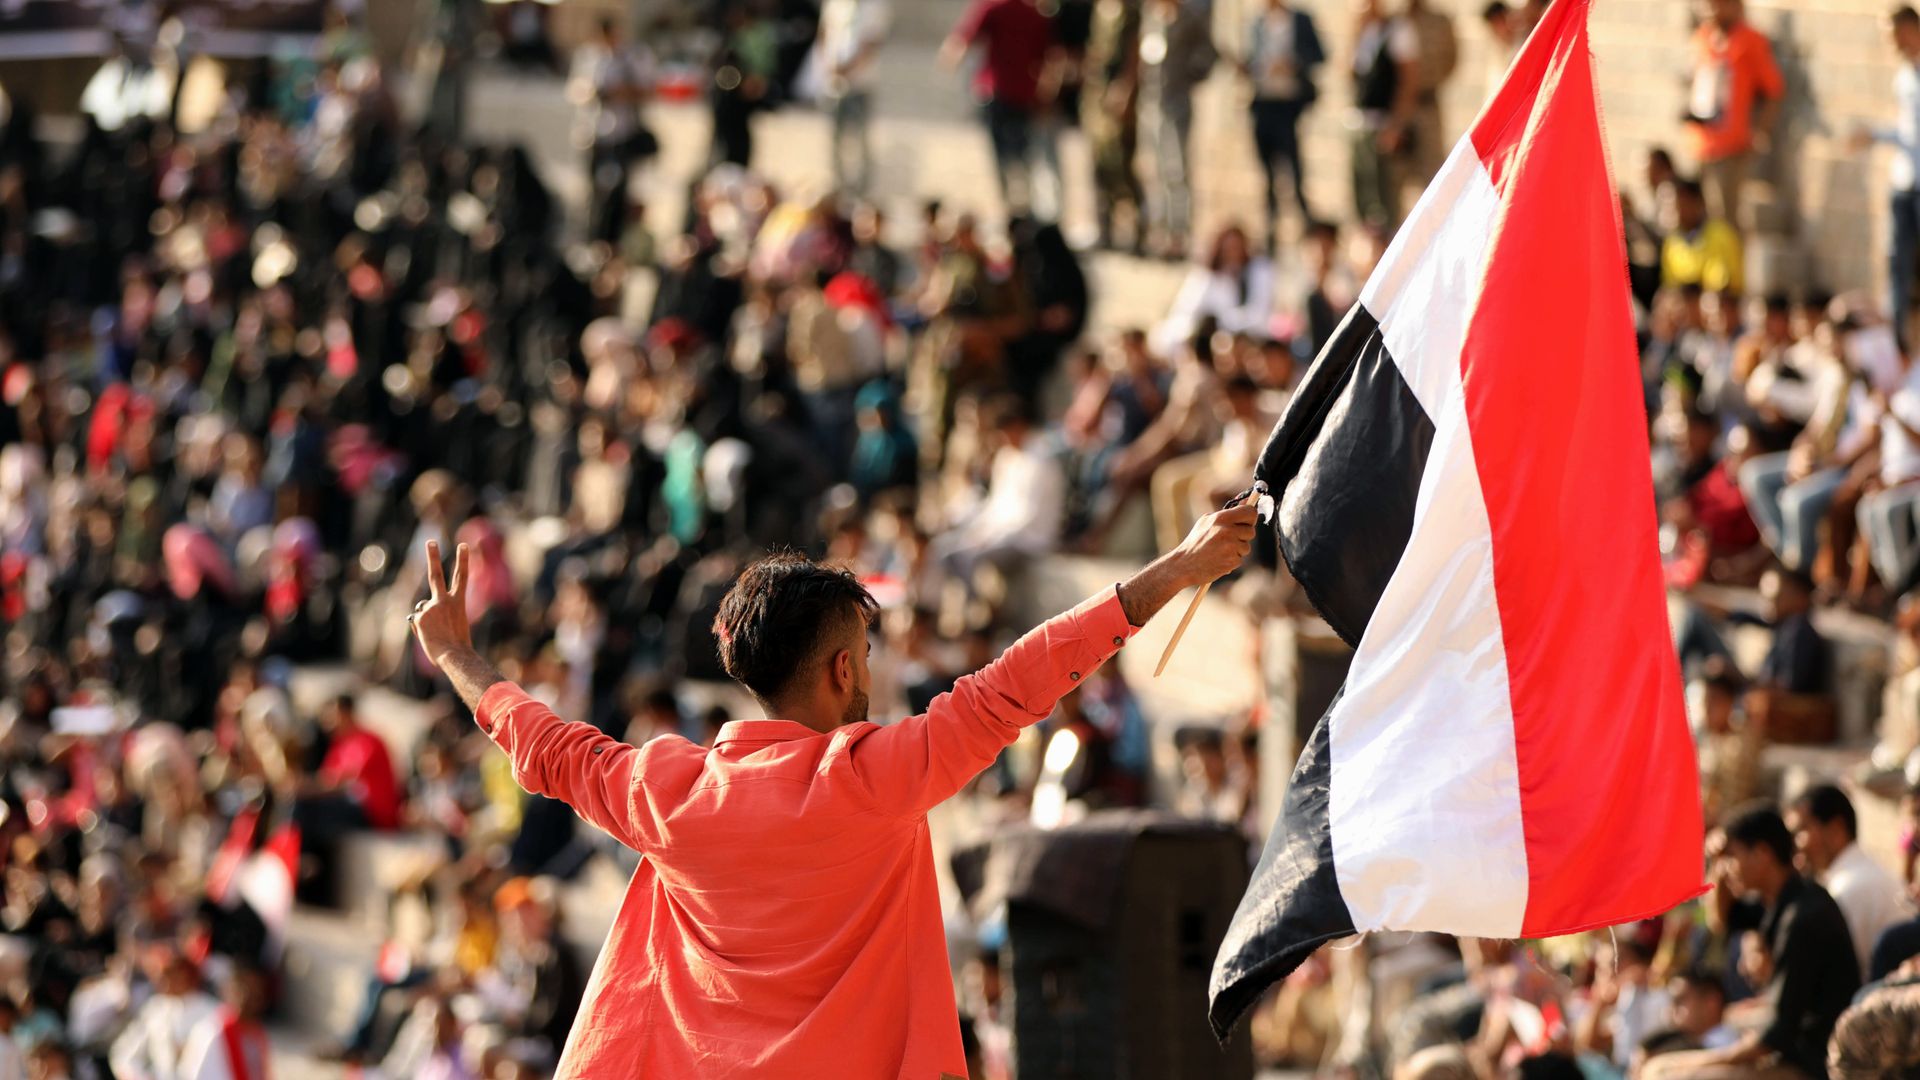 A young person waves a Yemen flag in front of a crowd.